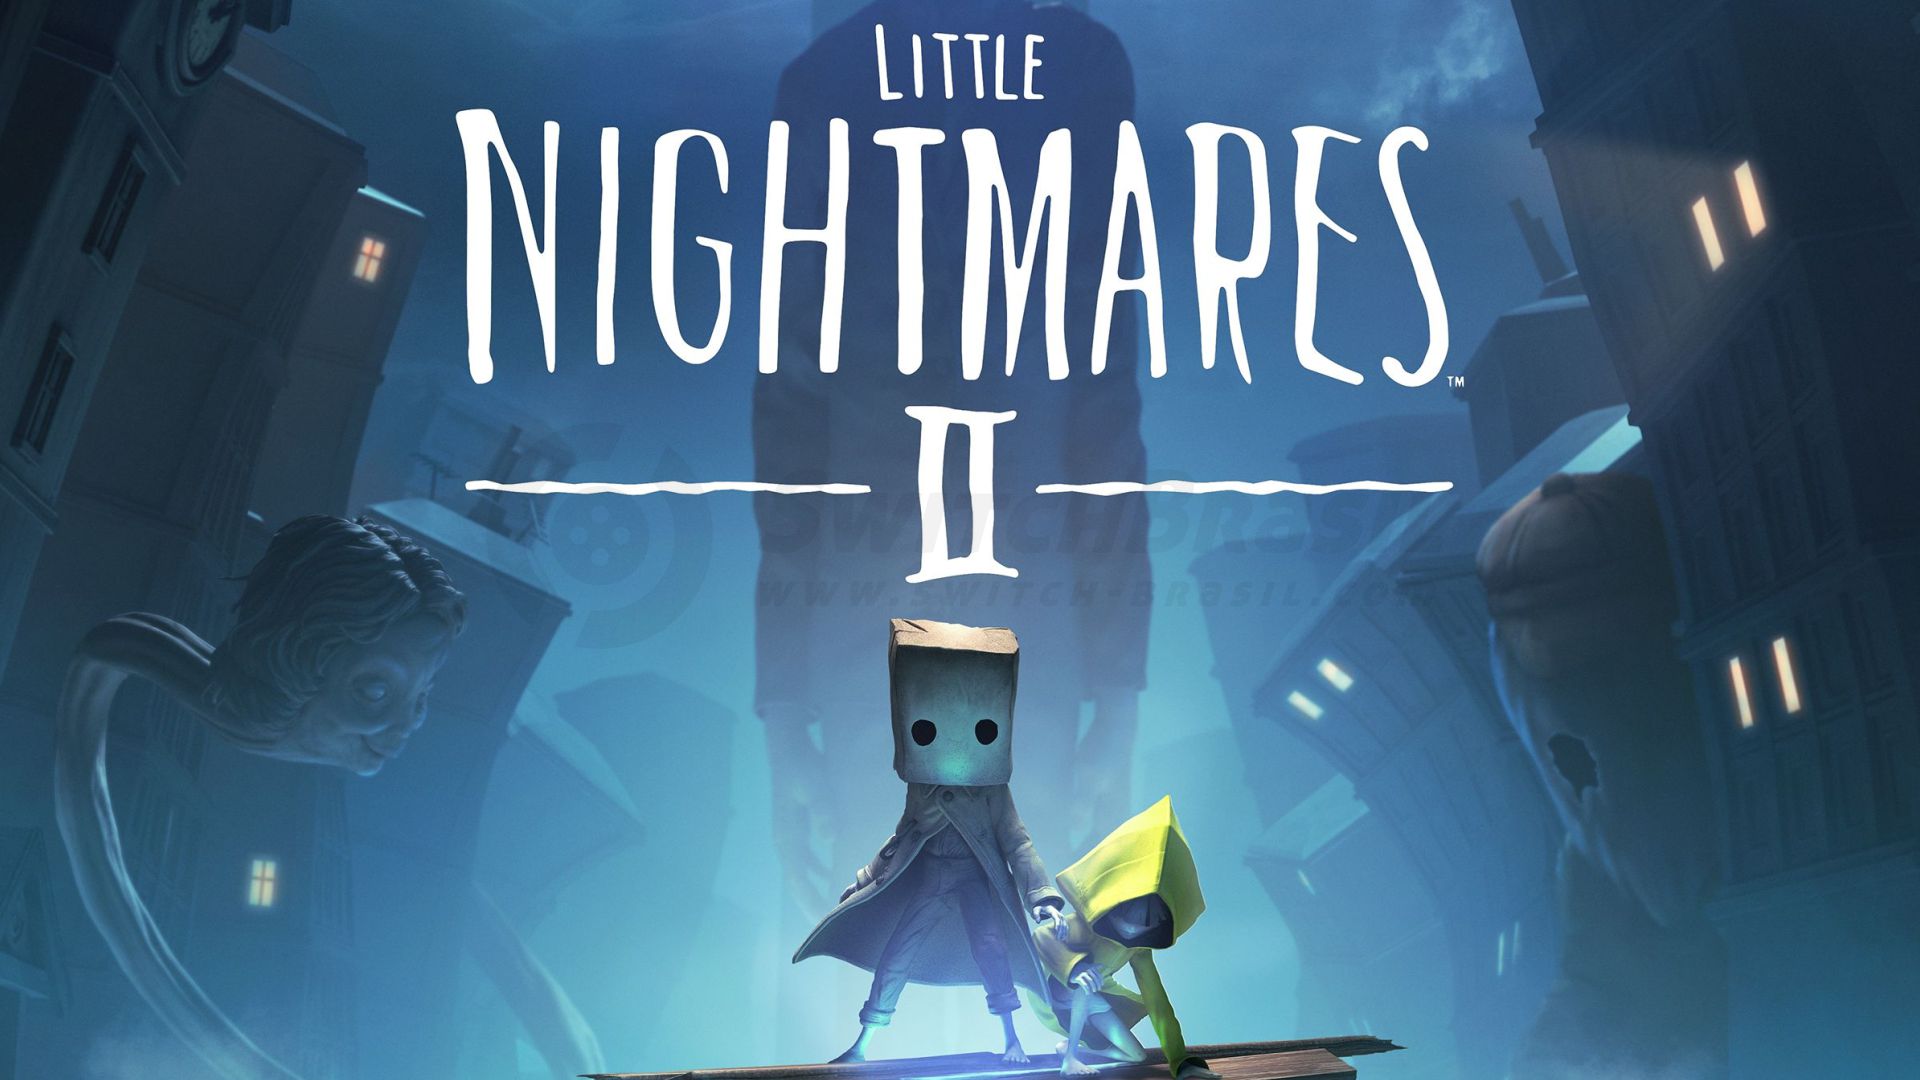 Download Little Nightmares 2 PPSSPP For Android • NaijaTechGist